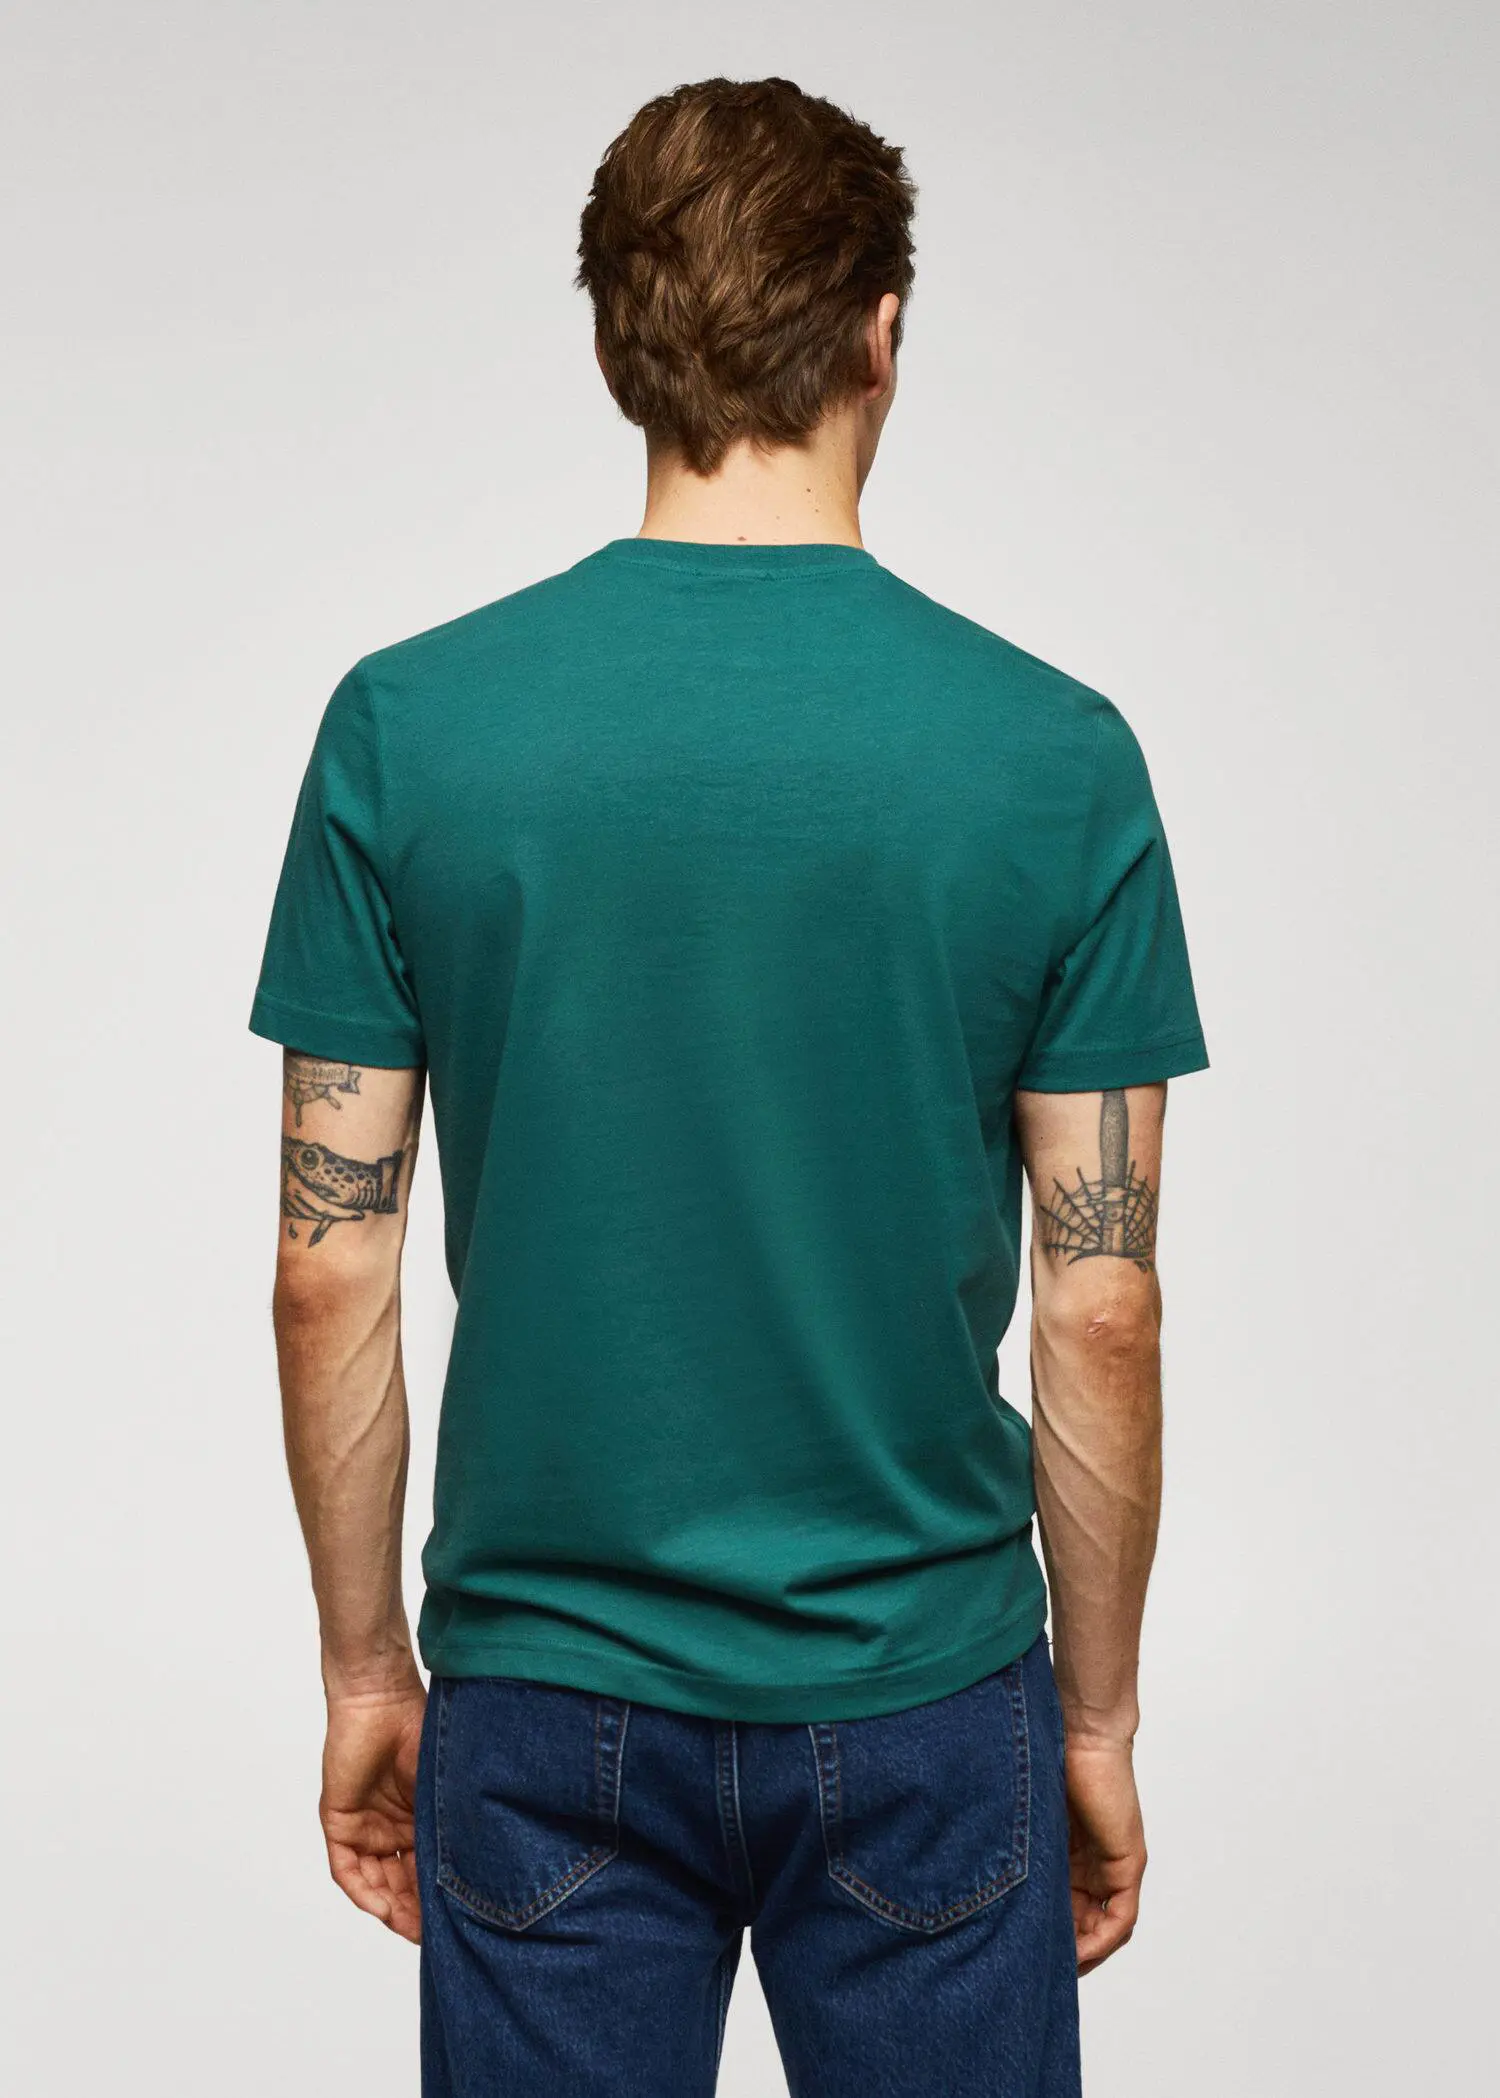 Mango 100% cotton t-shirt with logo. a man wearing a t-shirt and jeans. 